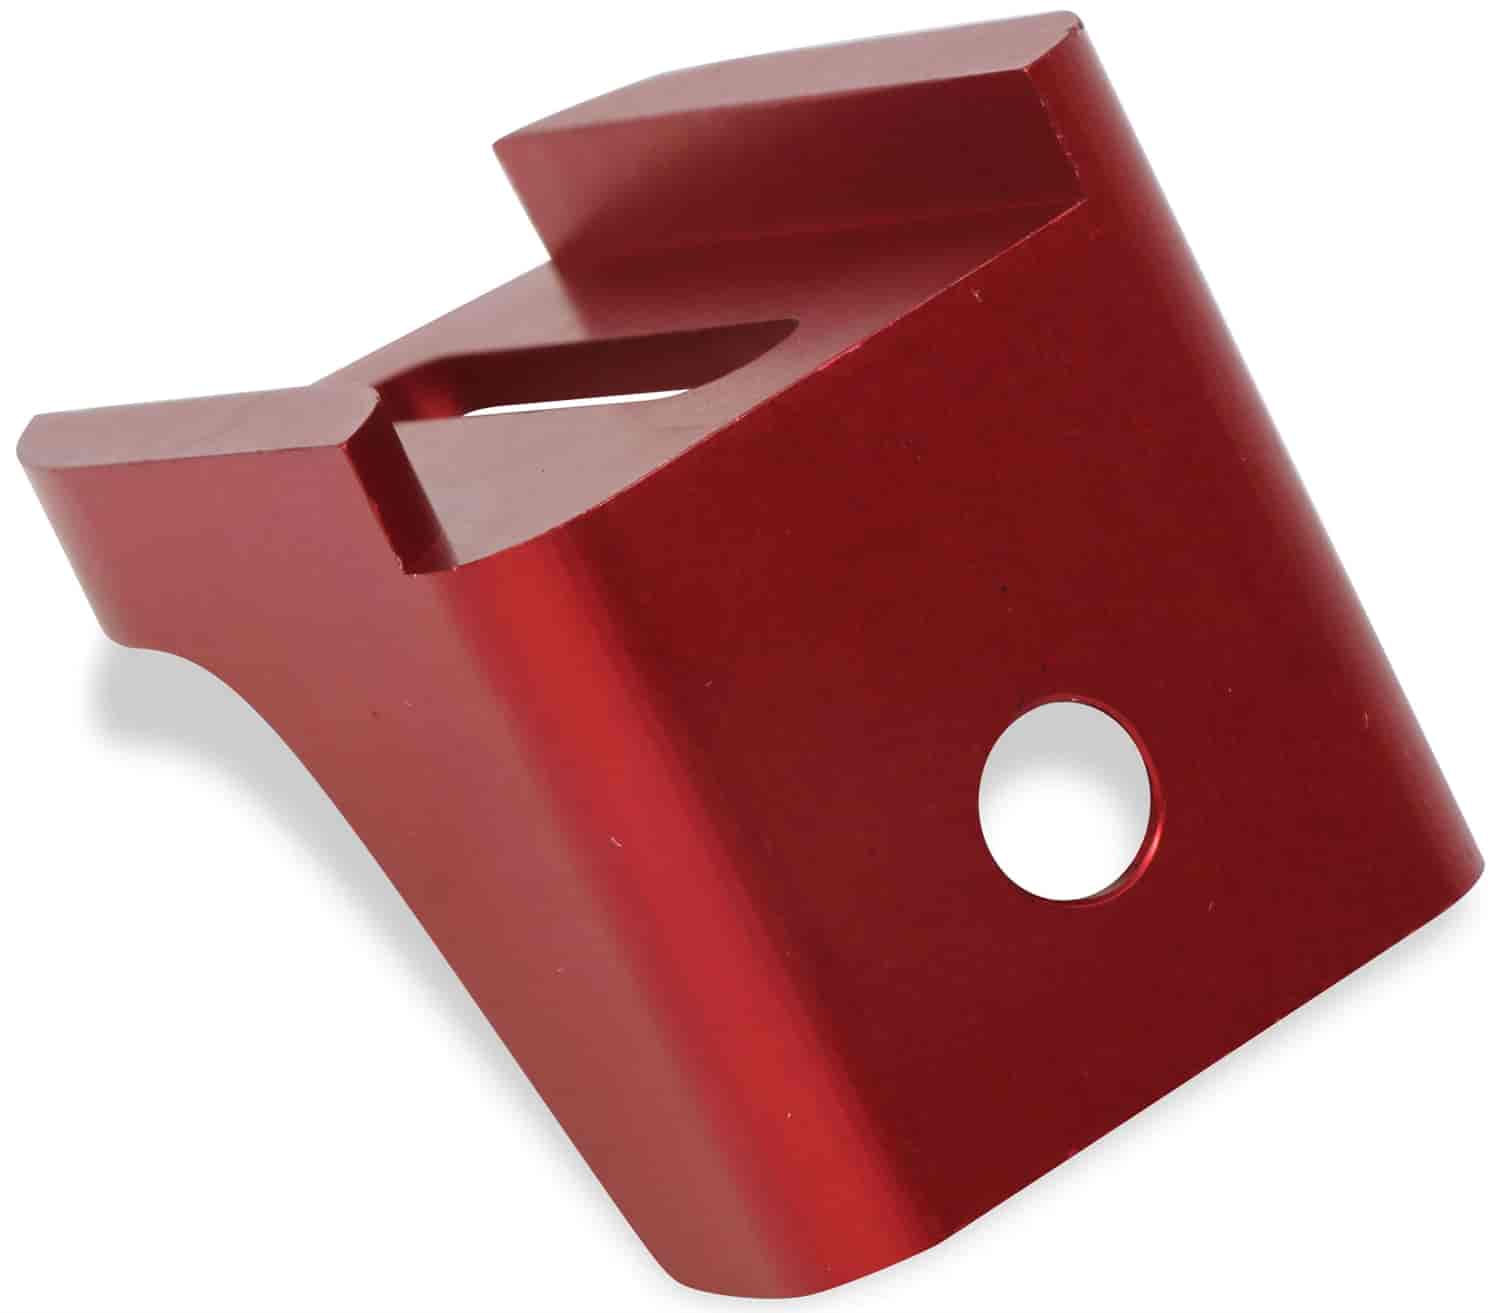 Kickdown Detent Cable Mount Bracket Fits Lokar-Style Cable, Use With Throttle Cable Bracket - Red Finish